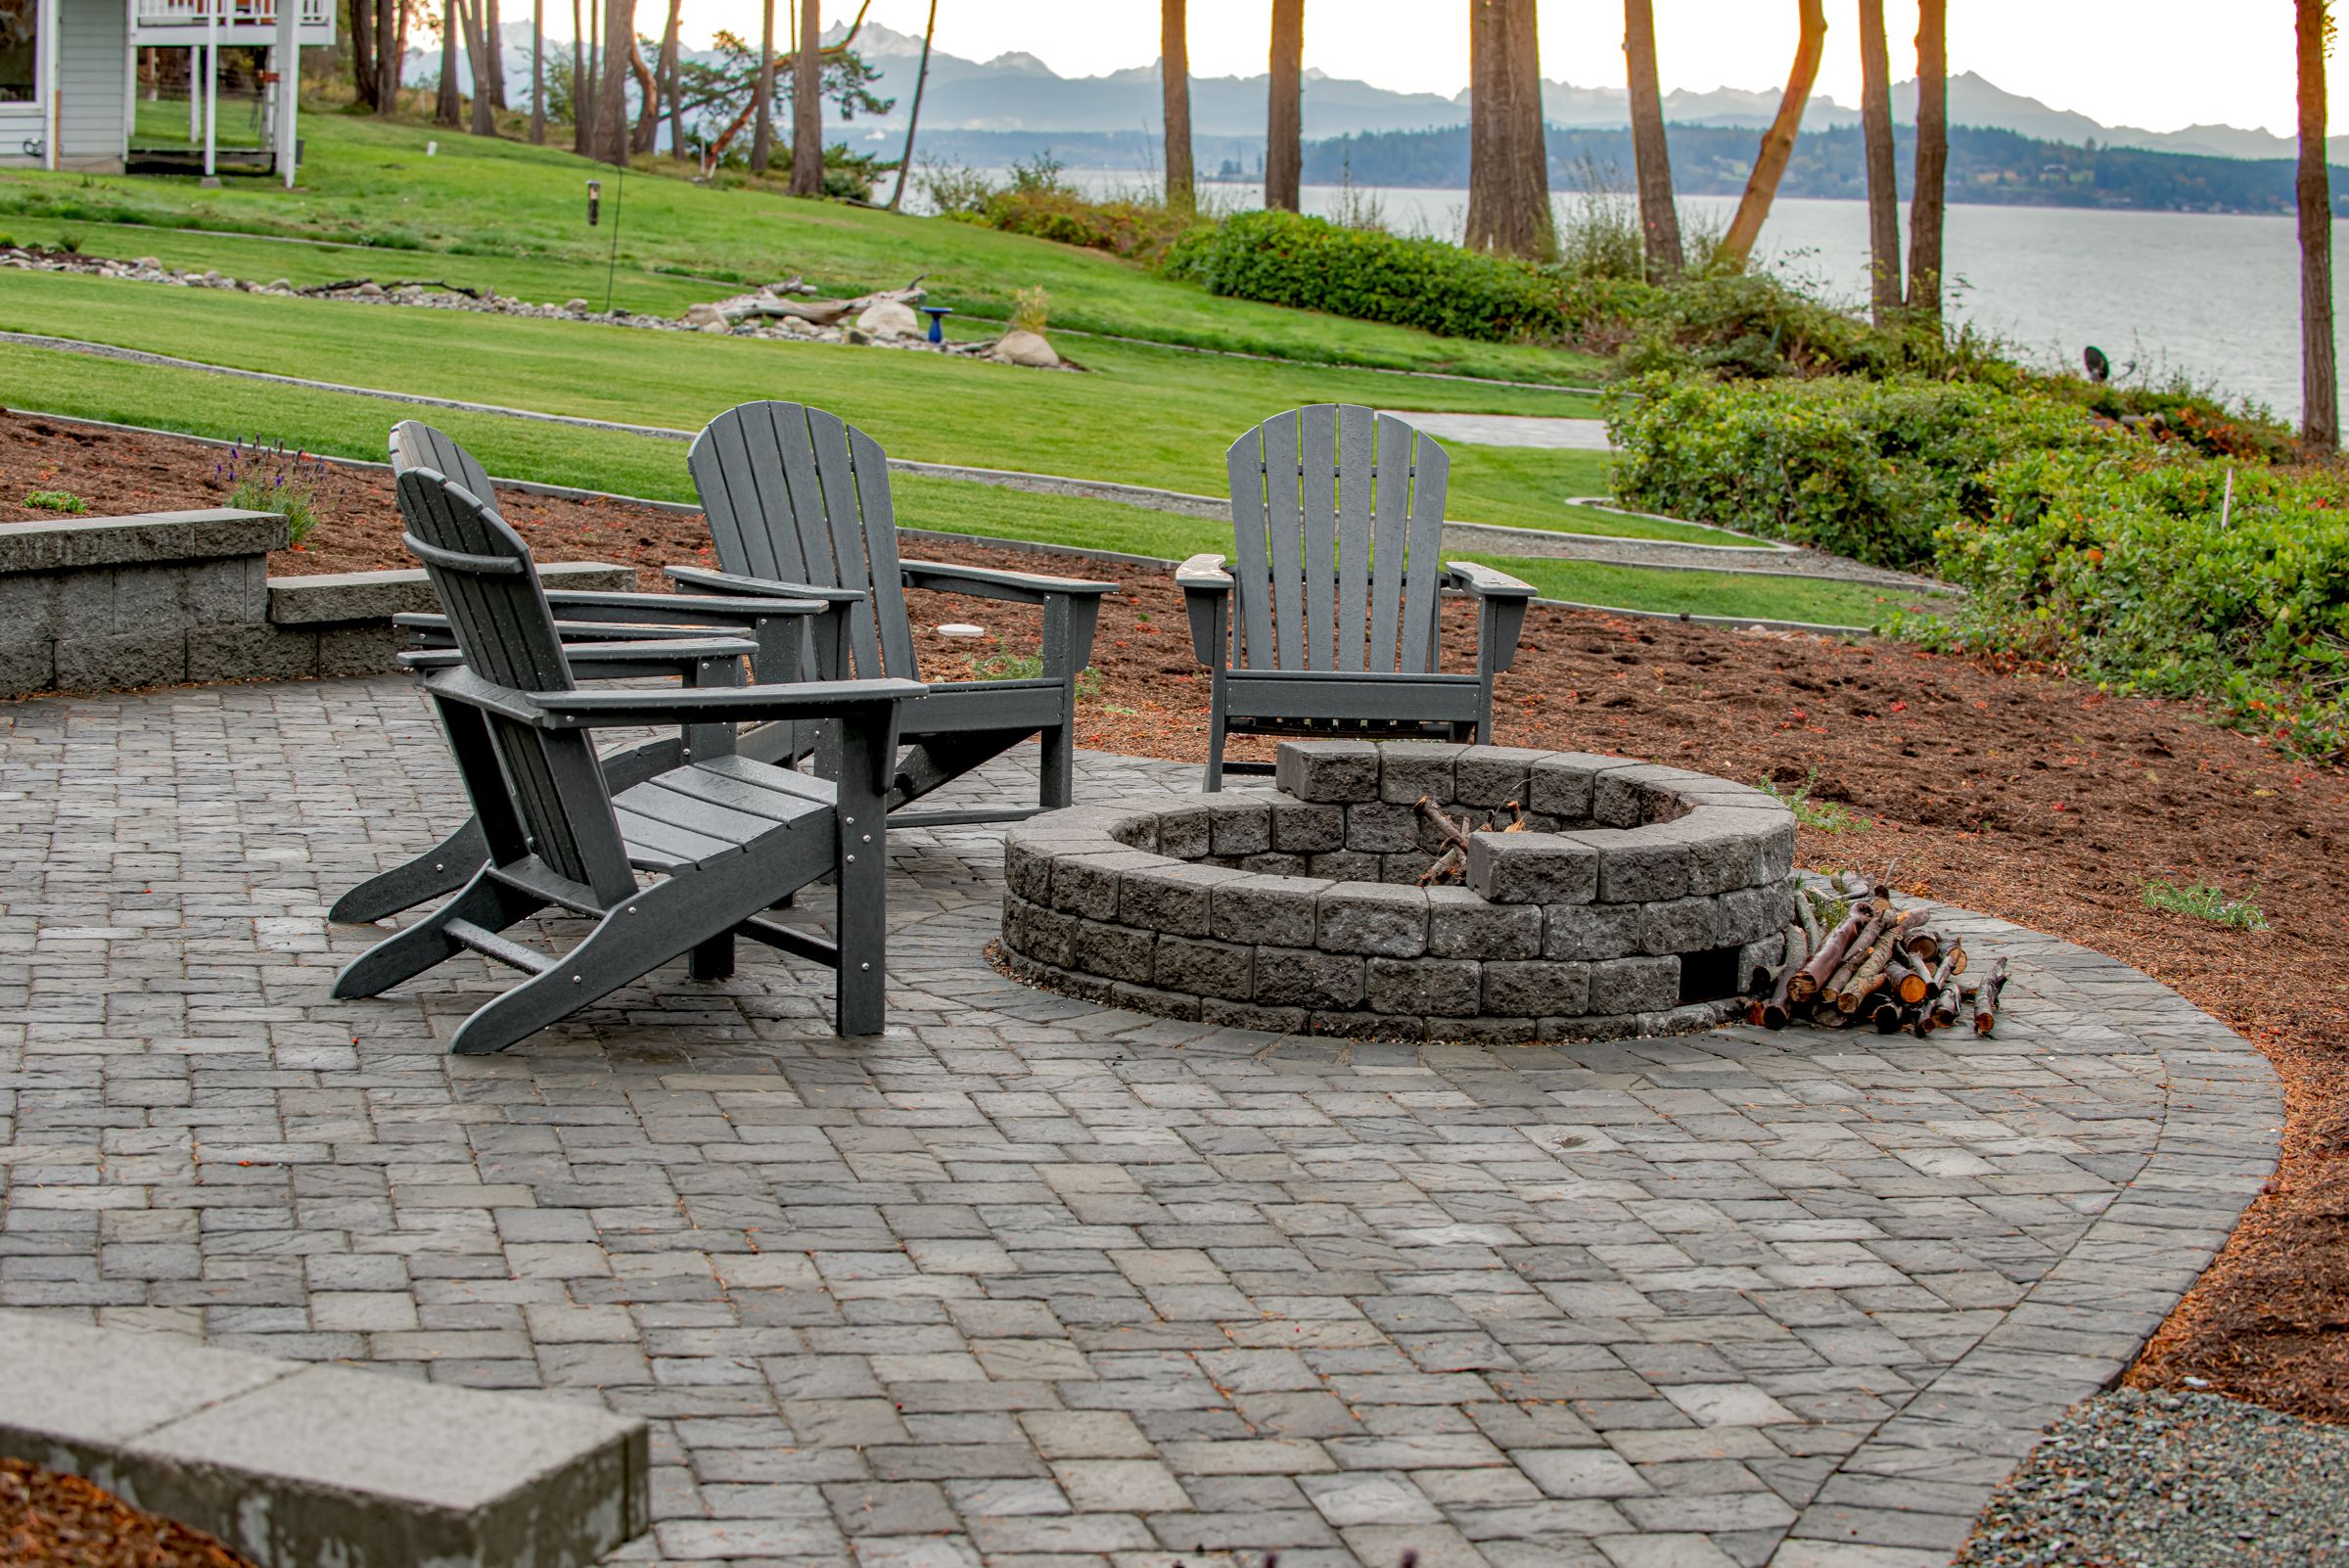 Circular patio with fire pit created with retaining wall blocks